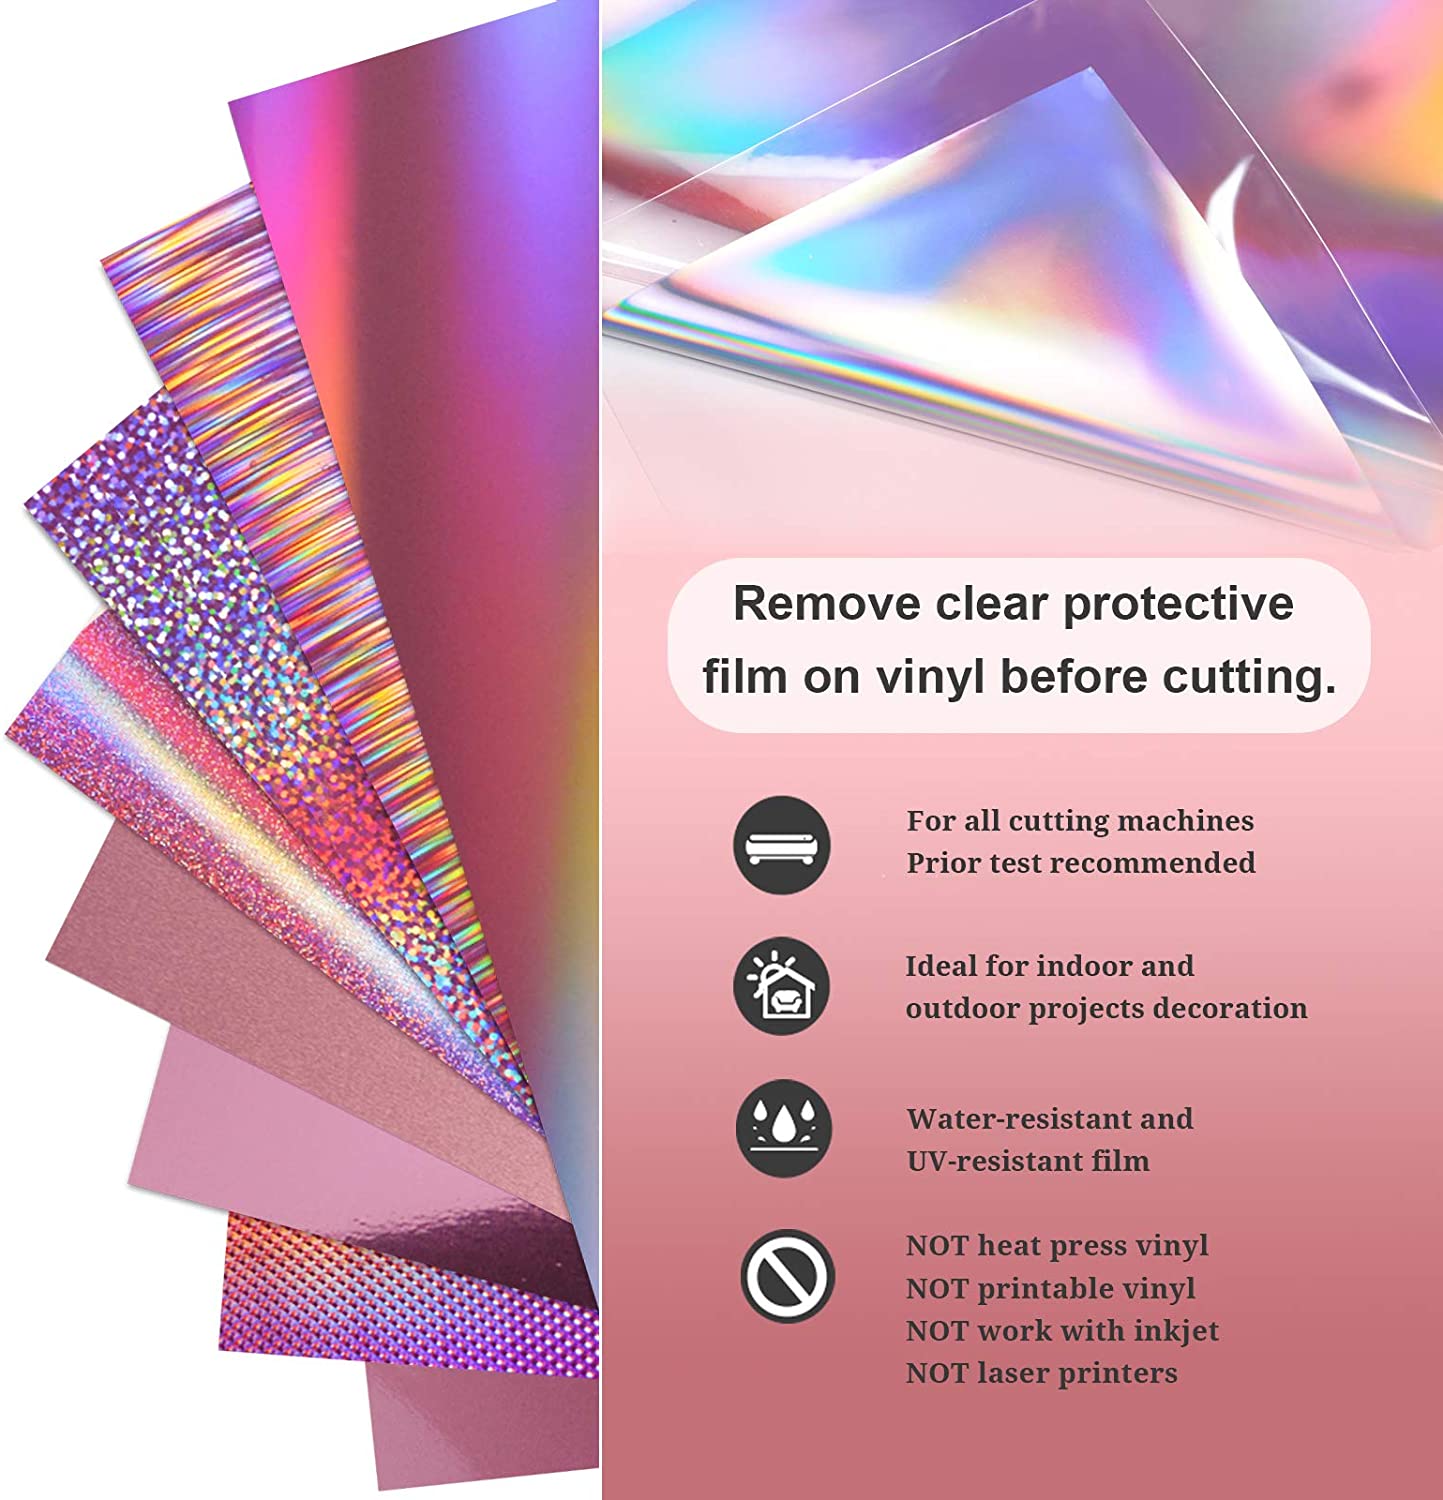 How to Work with TeckWrapCraft Holographic Printable Sticker Vinyl